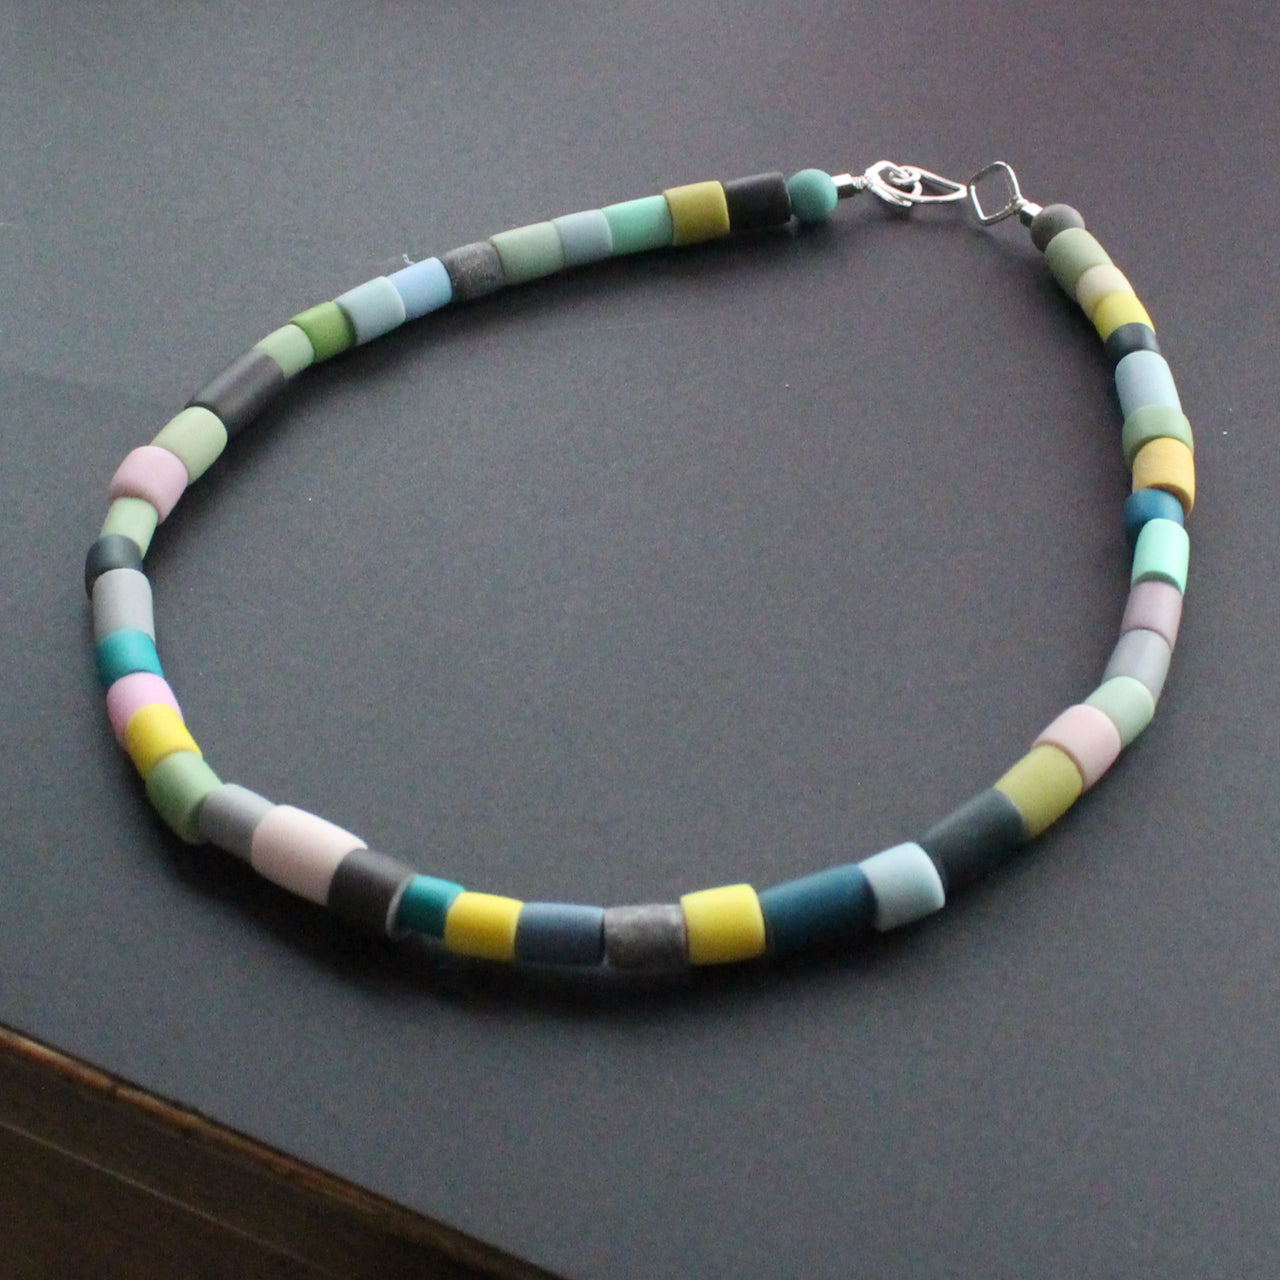 Tube bead polymer clay necklace in muted earth colours by artist Clare Lloyd